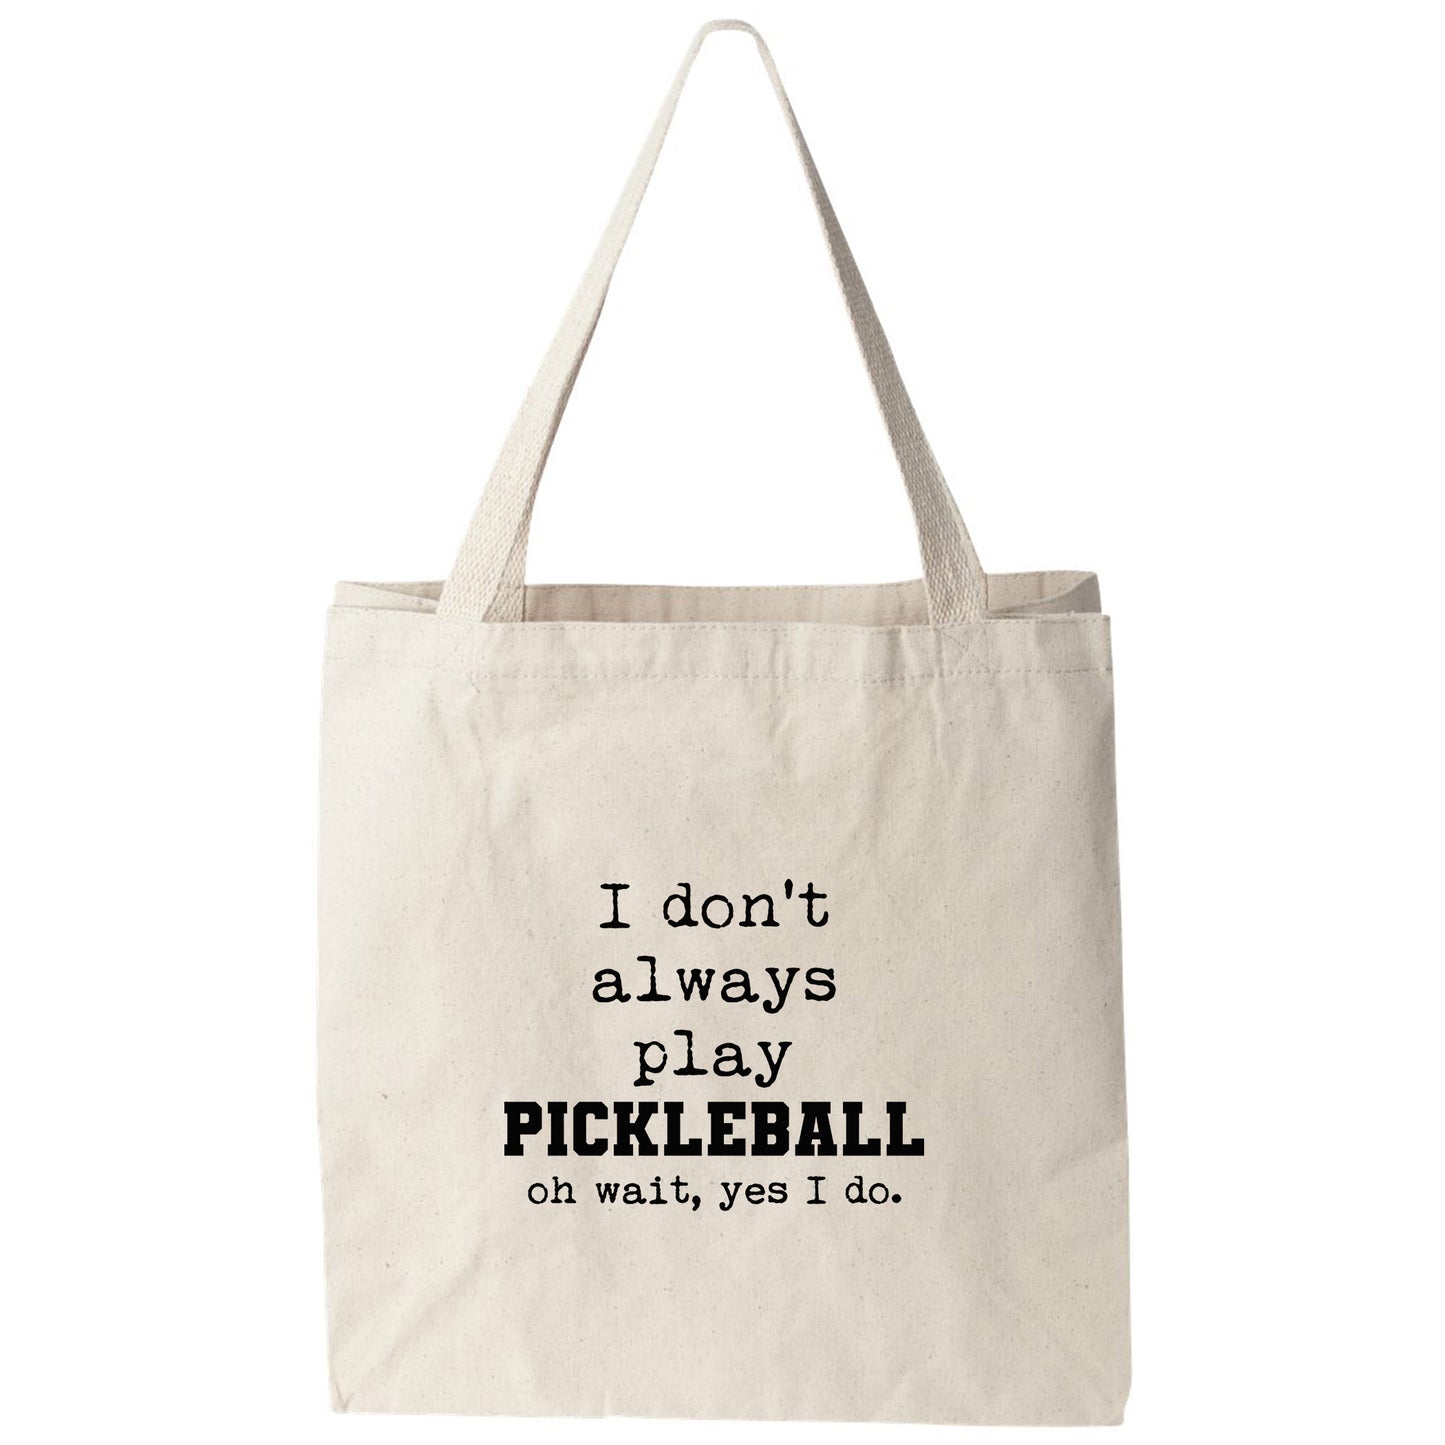 a tote bag that says i don't always play pickleball